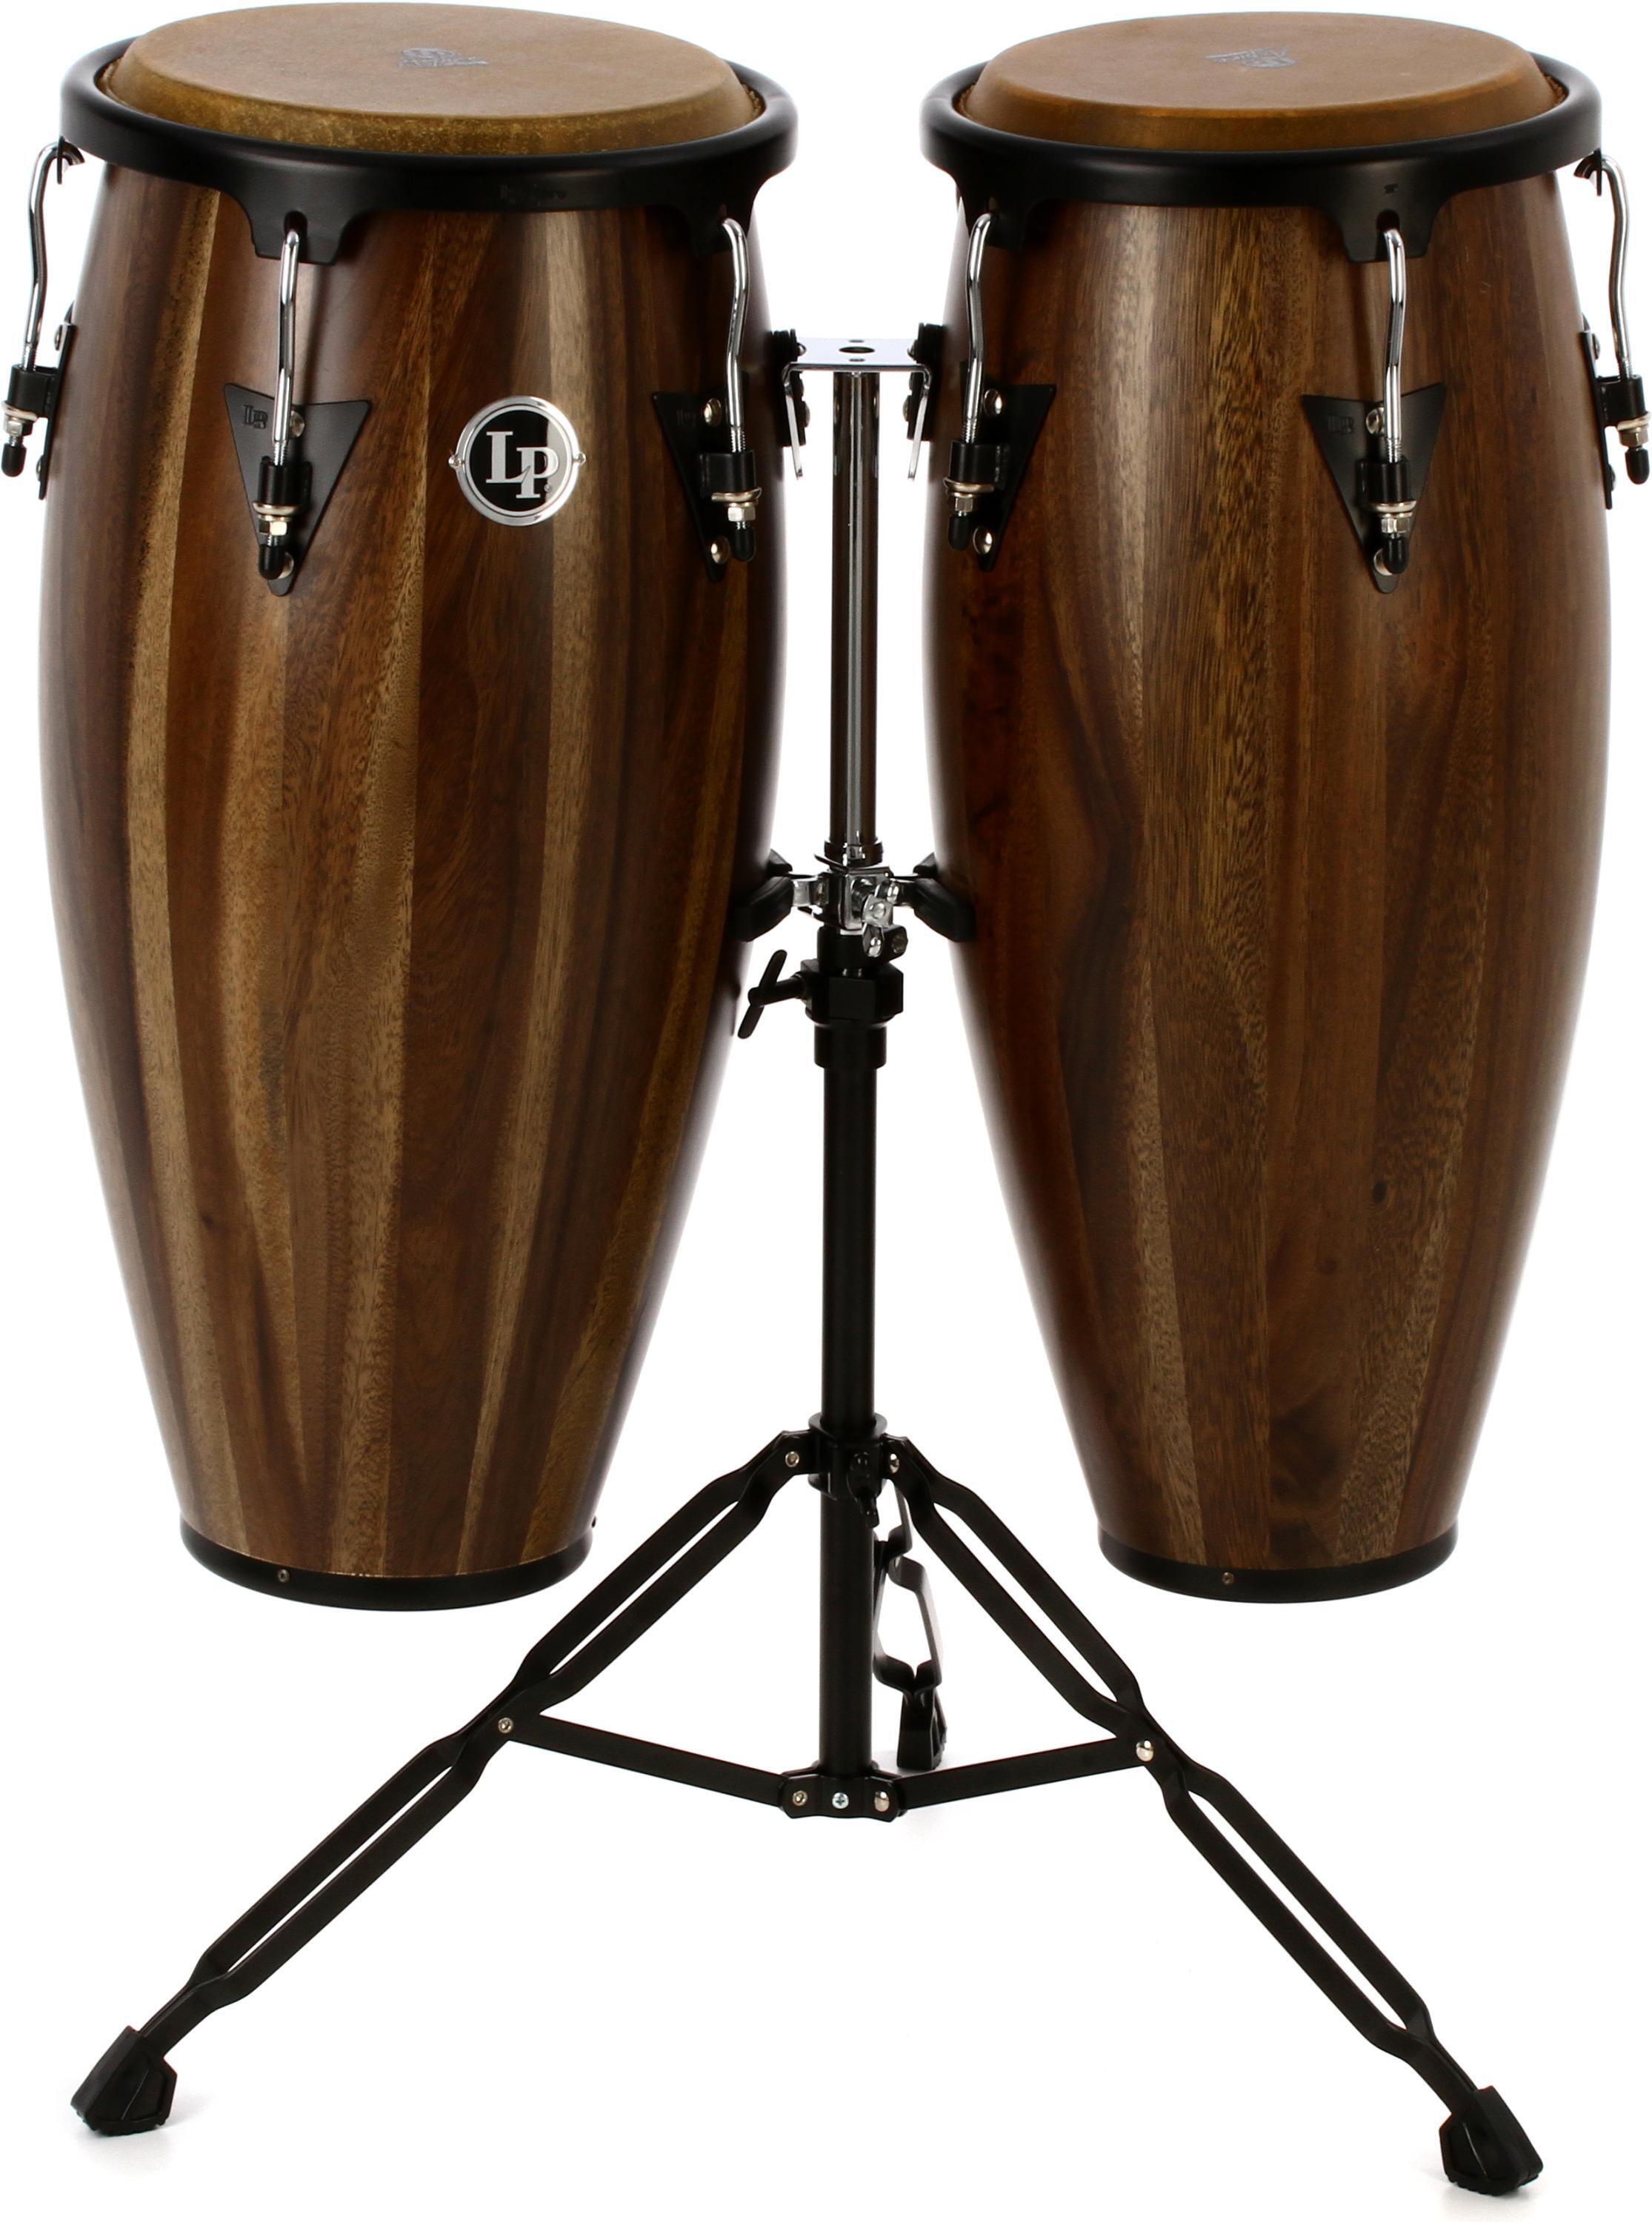 Latin Percussion Giovanni Compact Conga - 11 inch | Sweetwater